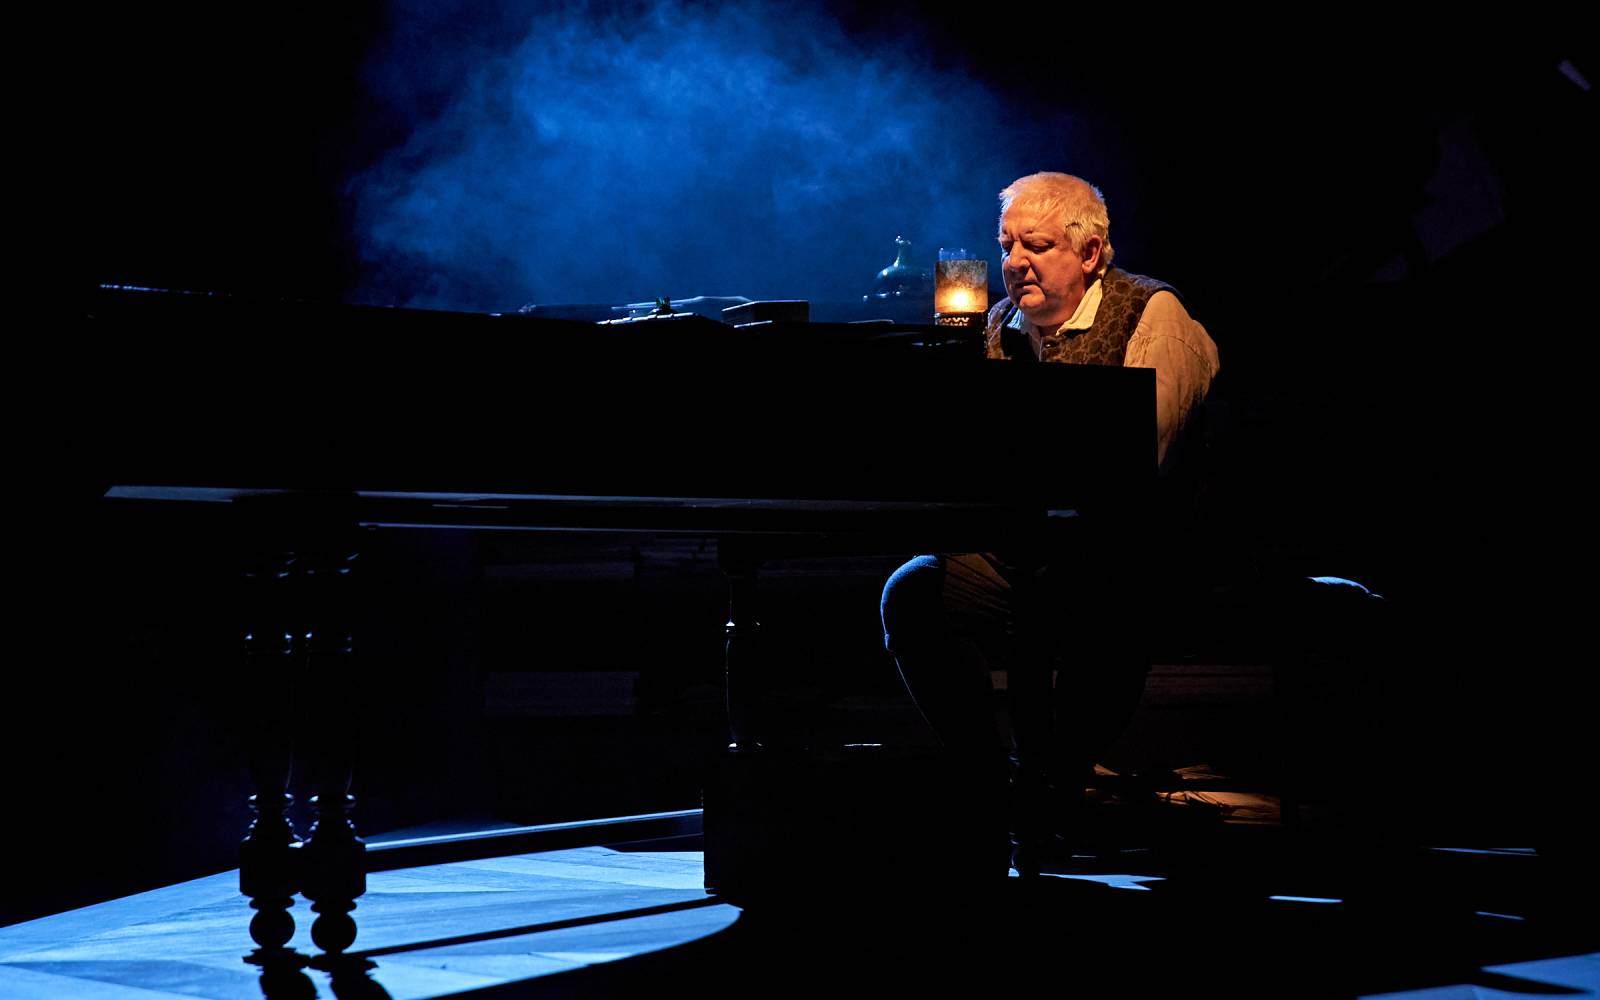 On a dark stage, lit by candlelight, Simon Russell Beale plays a keyboard instrument.